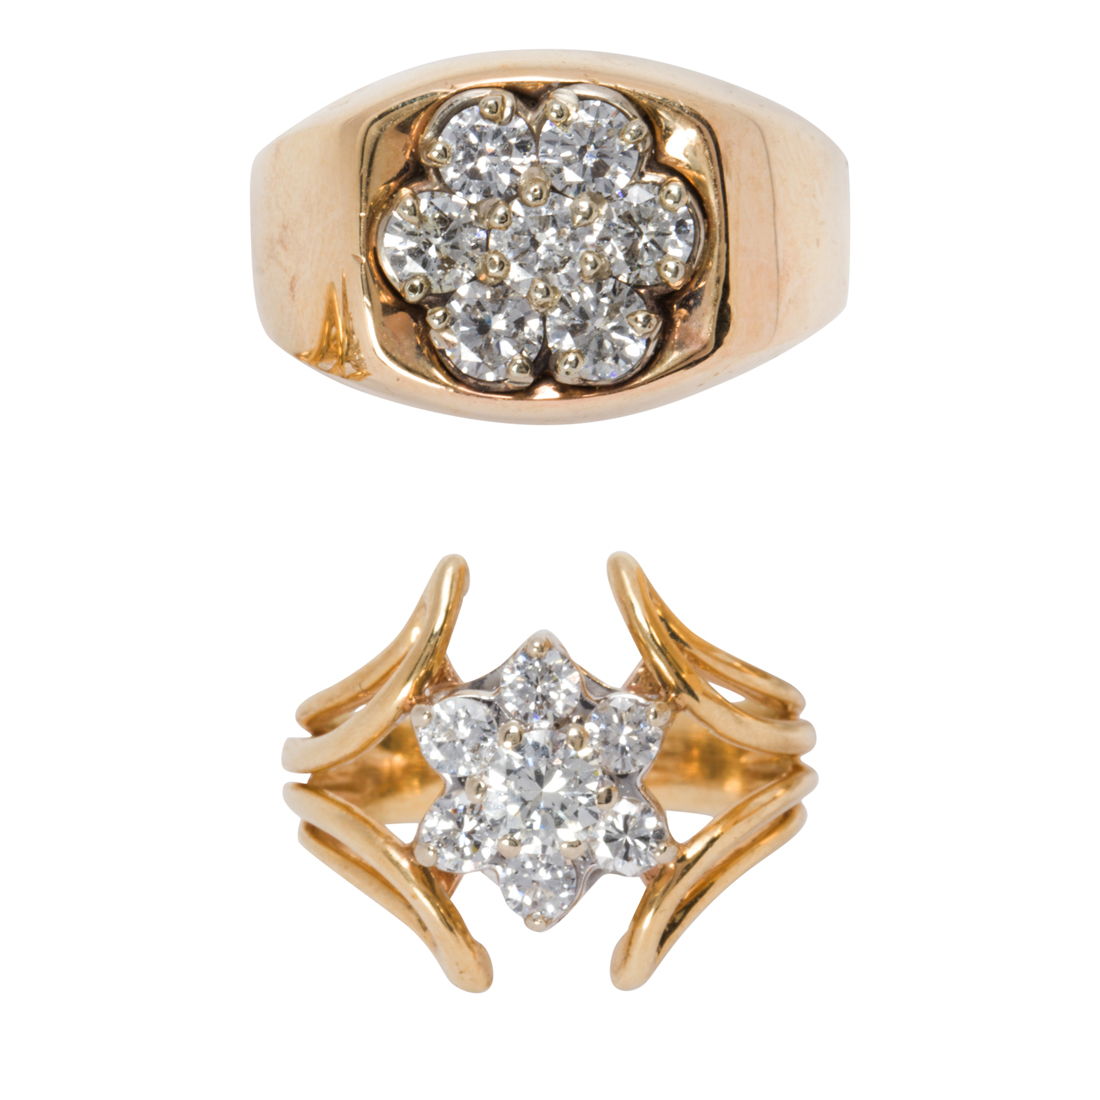 TWO DIAMOND AND 14K GOLD RINGS